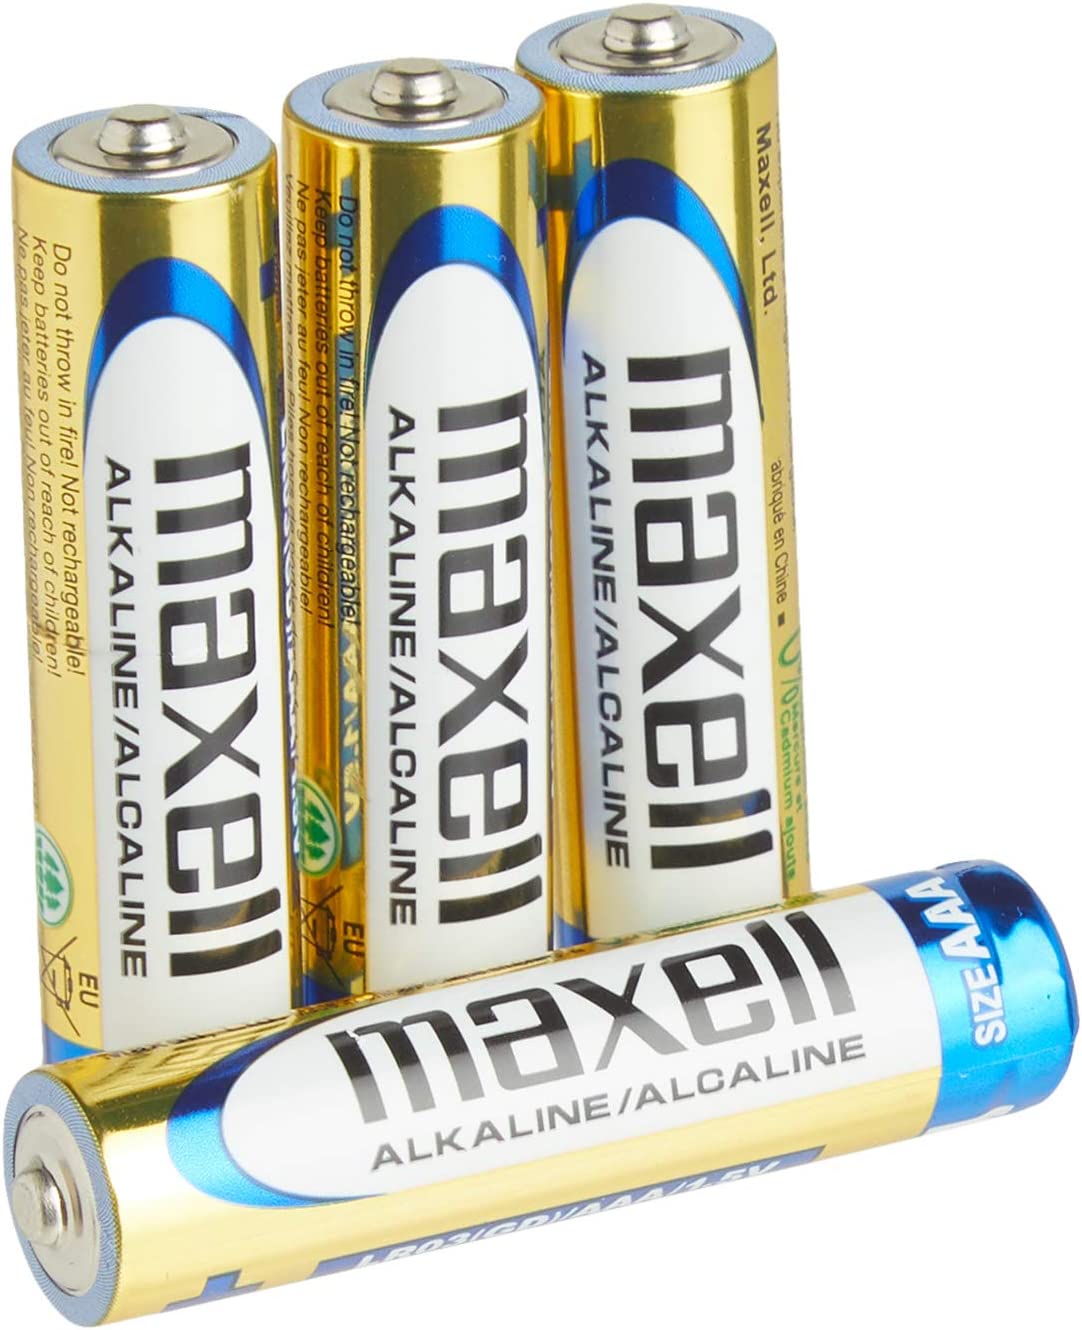 MAXELL 723865 Ready-to-go Long Lasting and Reliable Alkaline AAA Battery ,4 Count (Pack of 1)